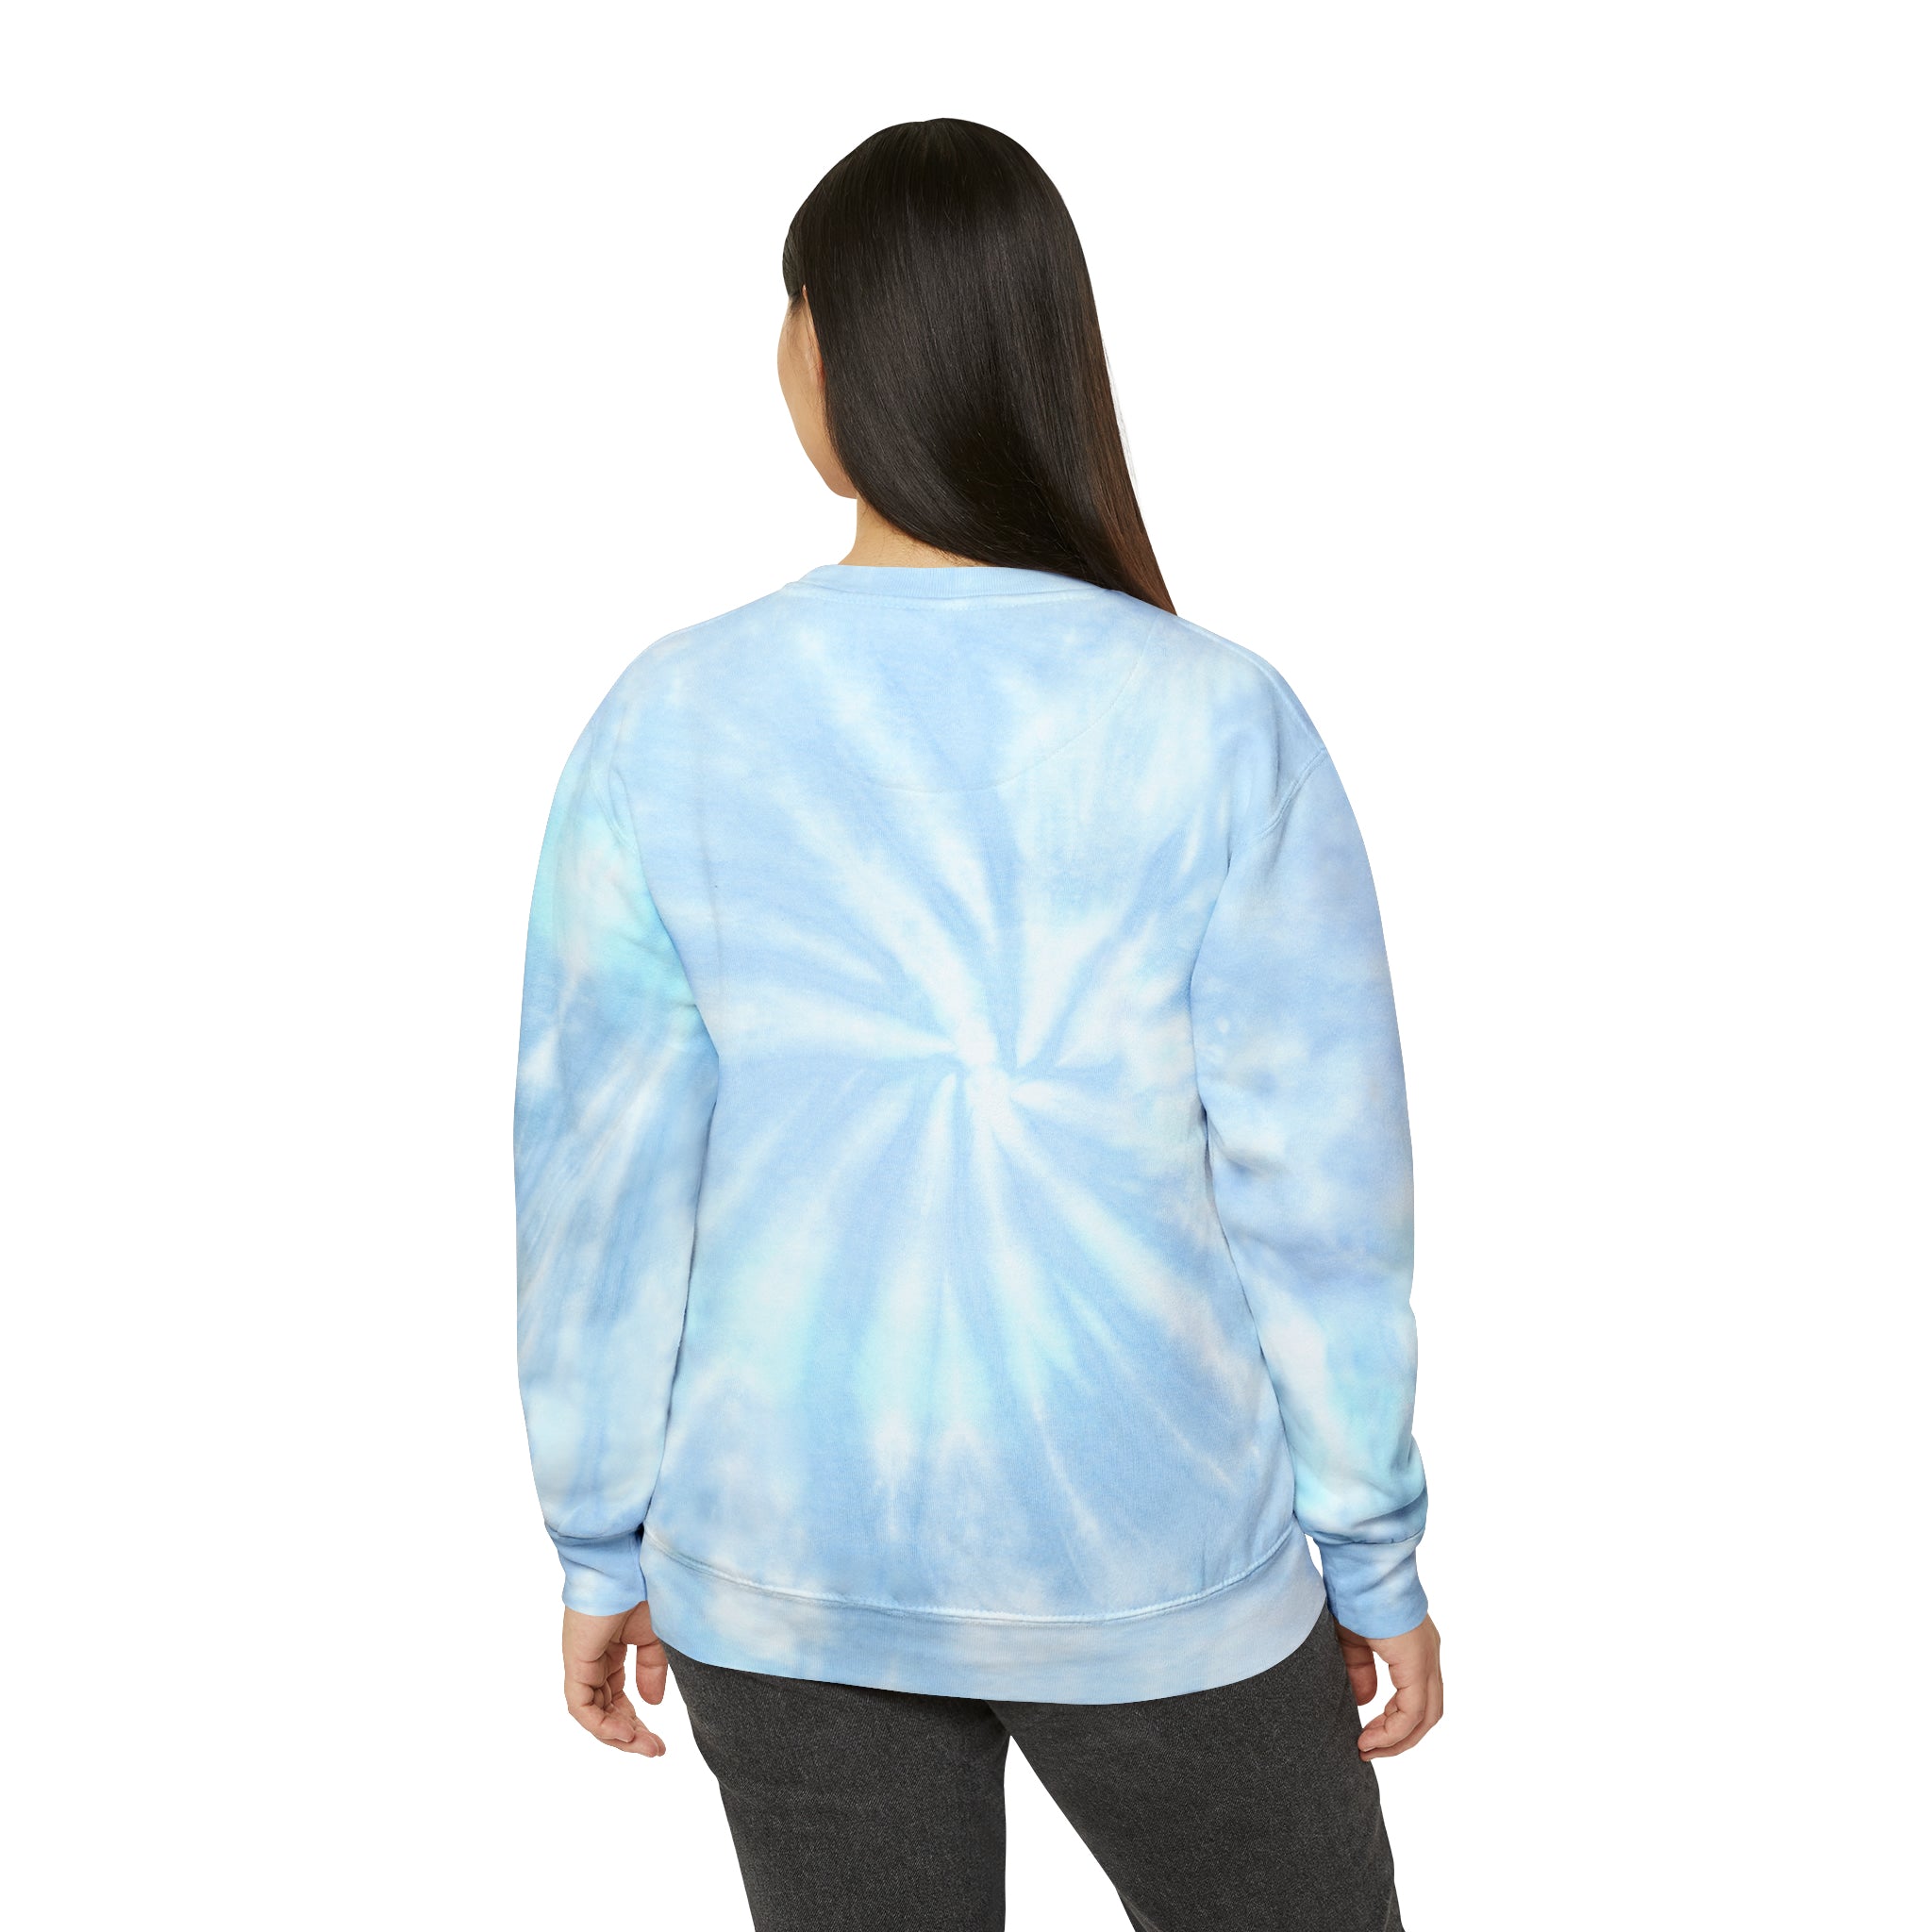 Care for Her Save our Planet Save our Oceans Unisex Tie-Dye Sweatshirt